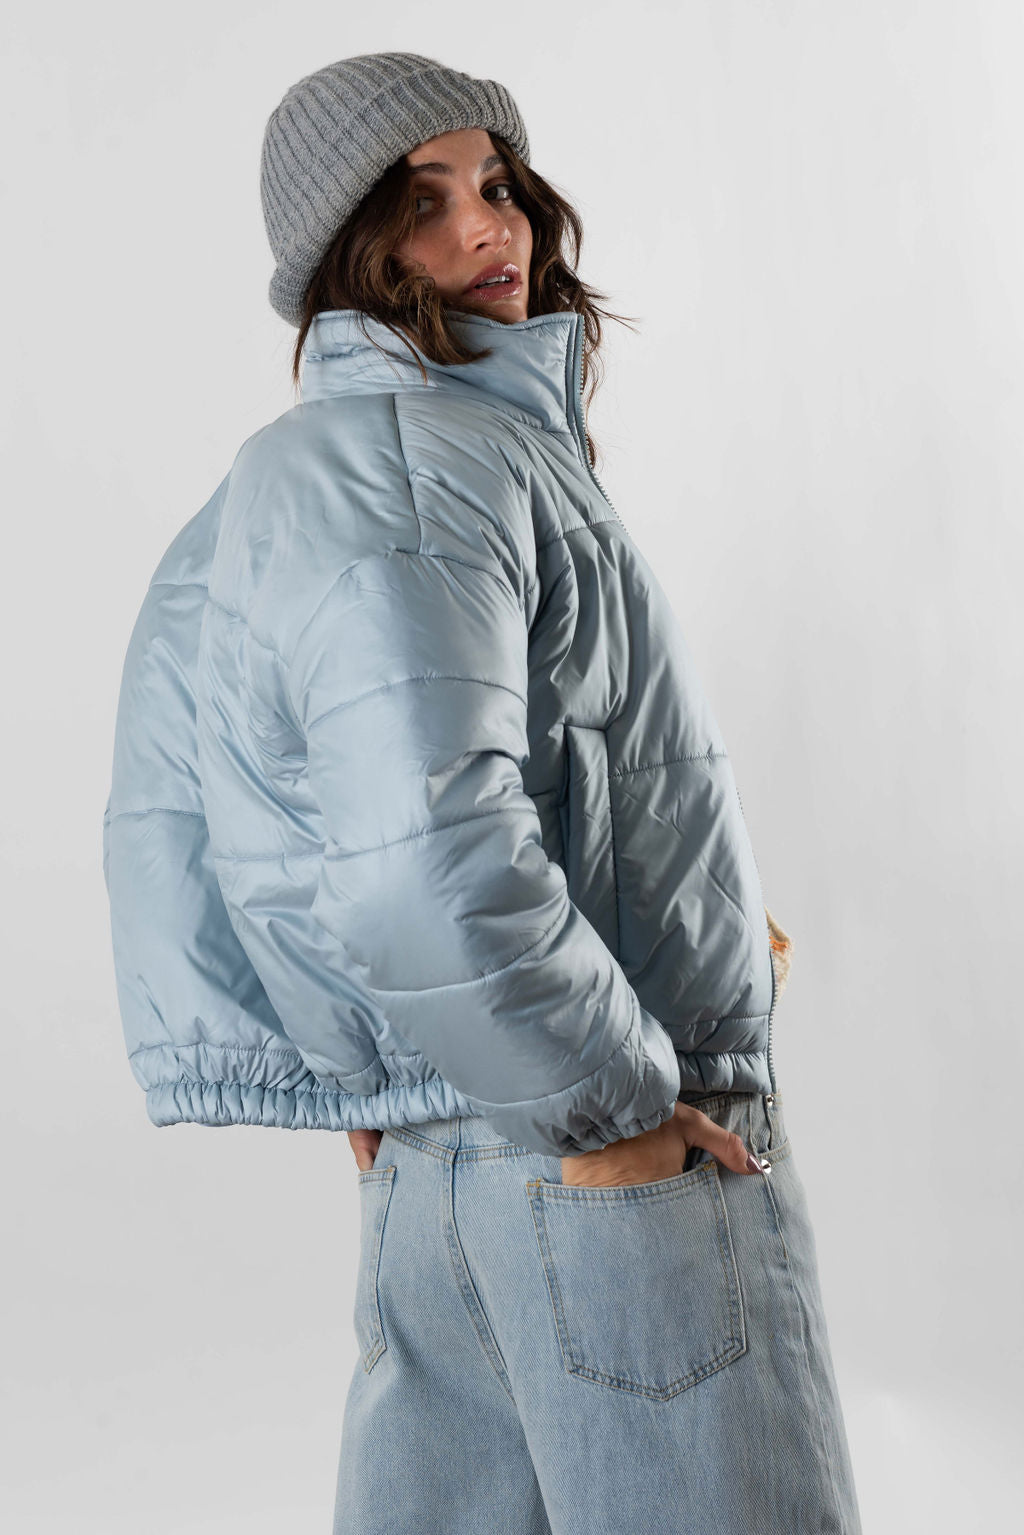 Aspen With Love Puffer Jacket In Ice Blue – Resurrection